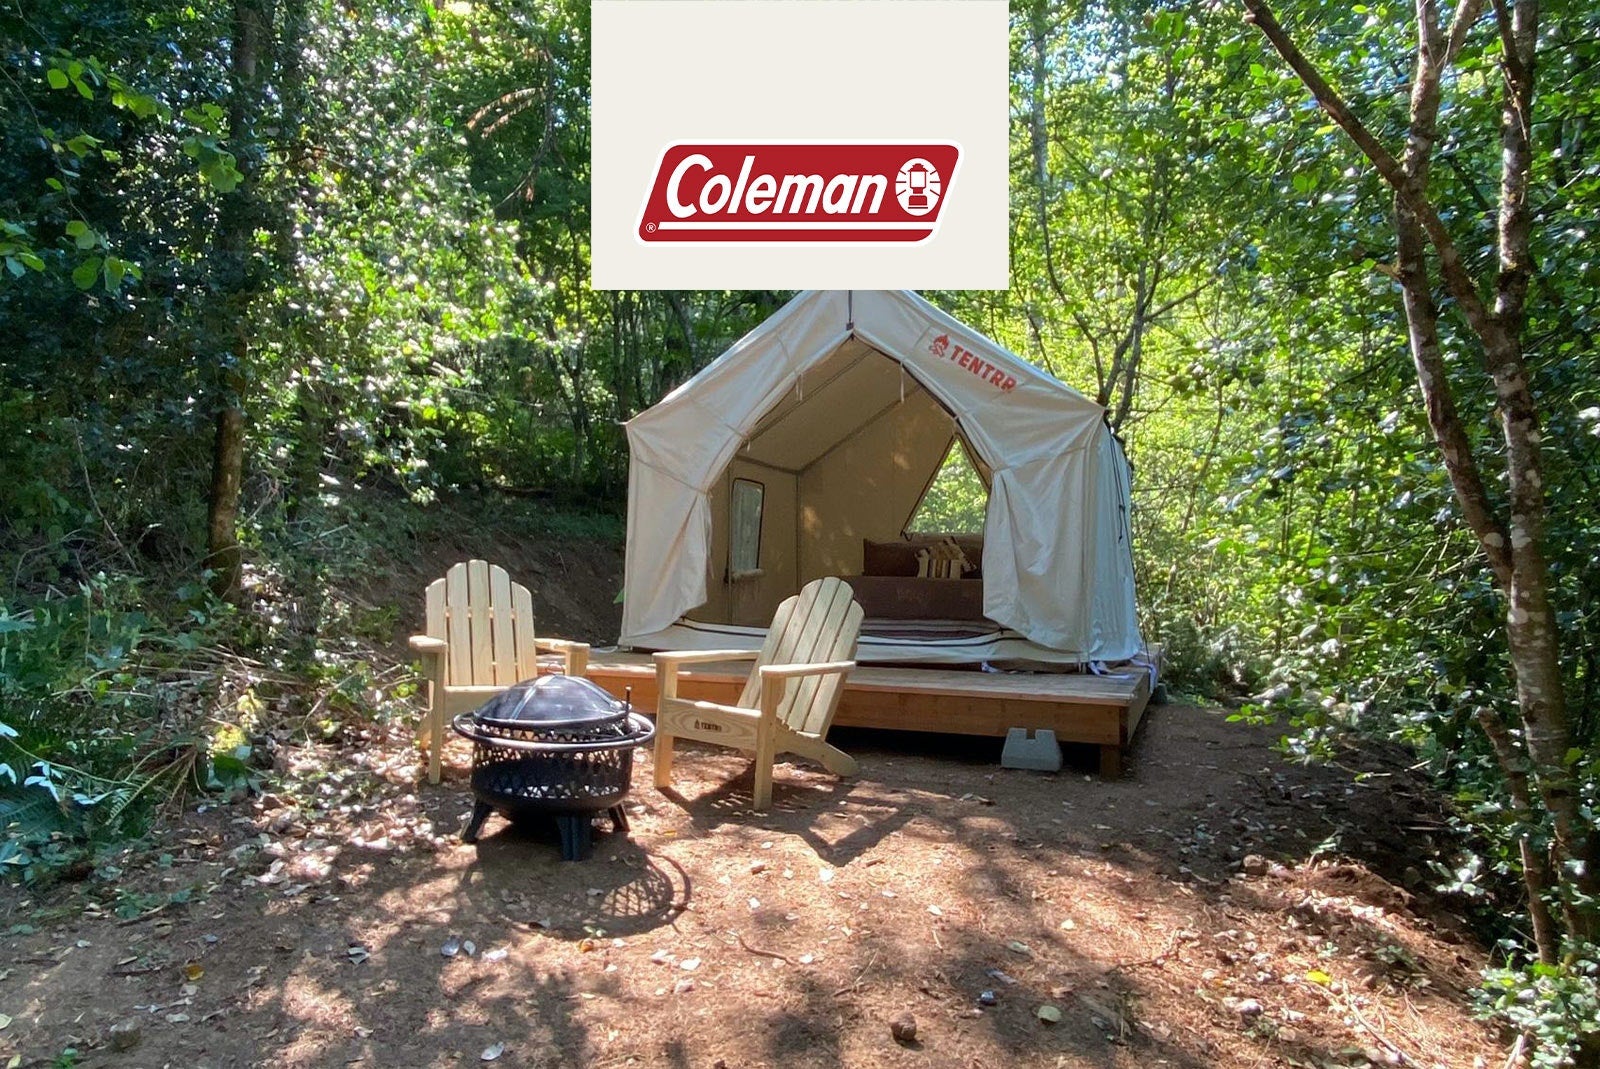 Camper submitted image from Tentrr Signature Site - Babbling Creek "Glamp"site at Cuzicanland - Coleman Cooking Site - 1